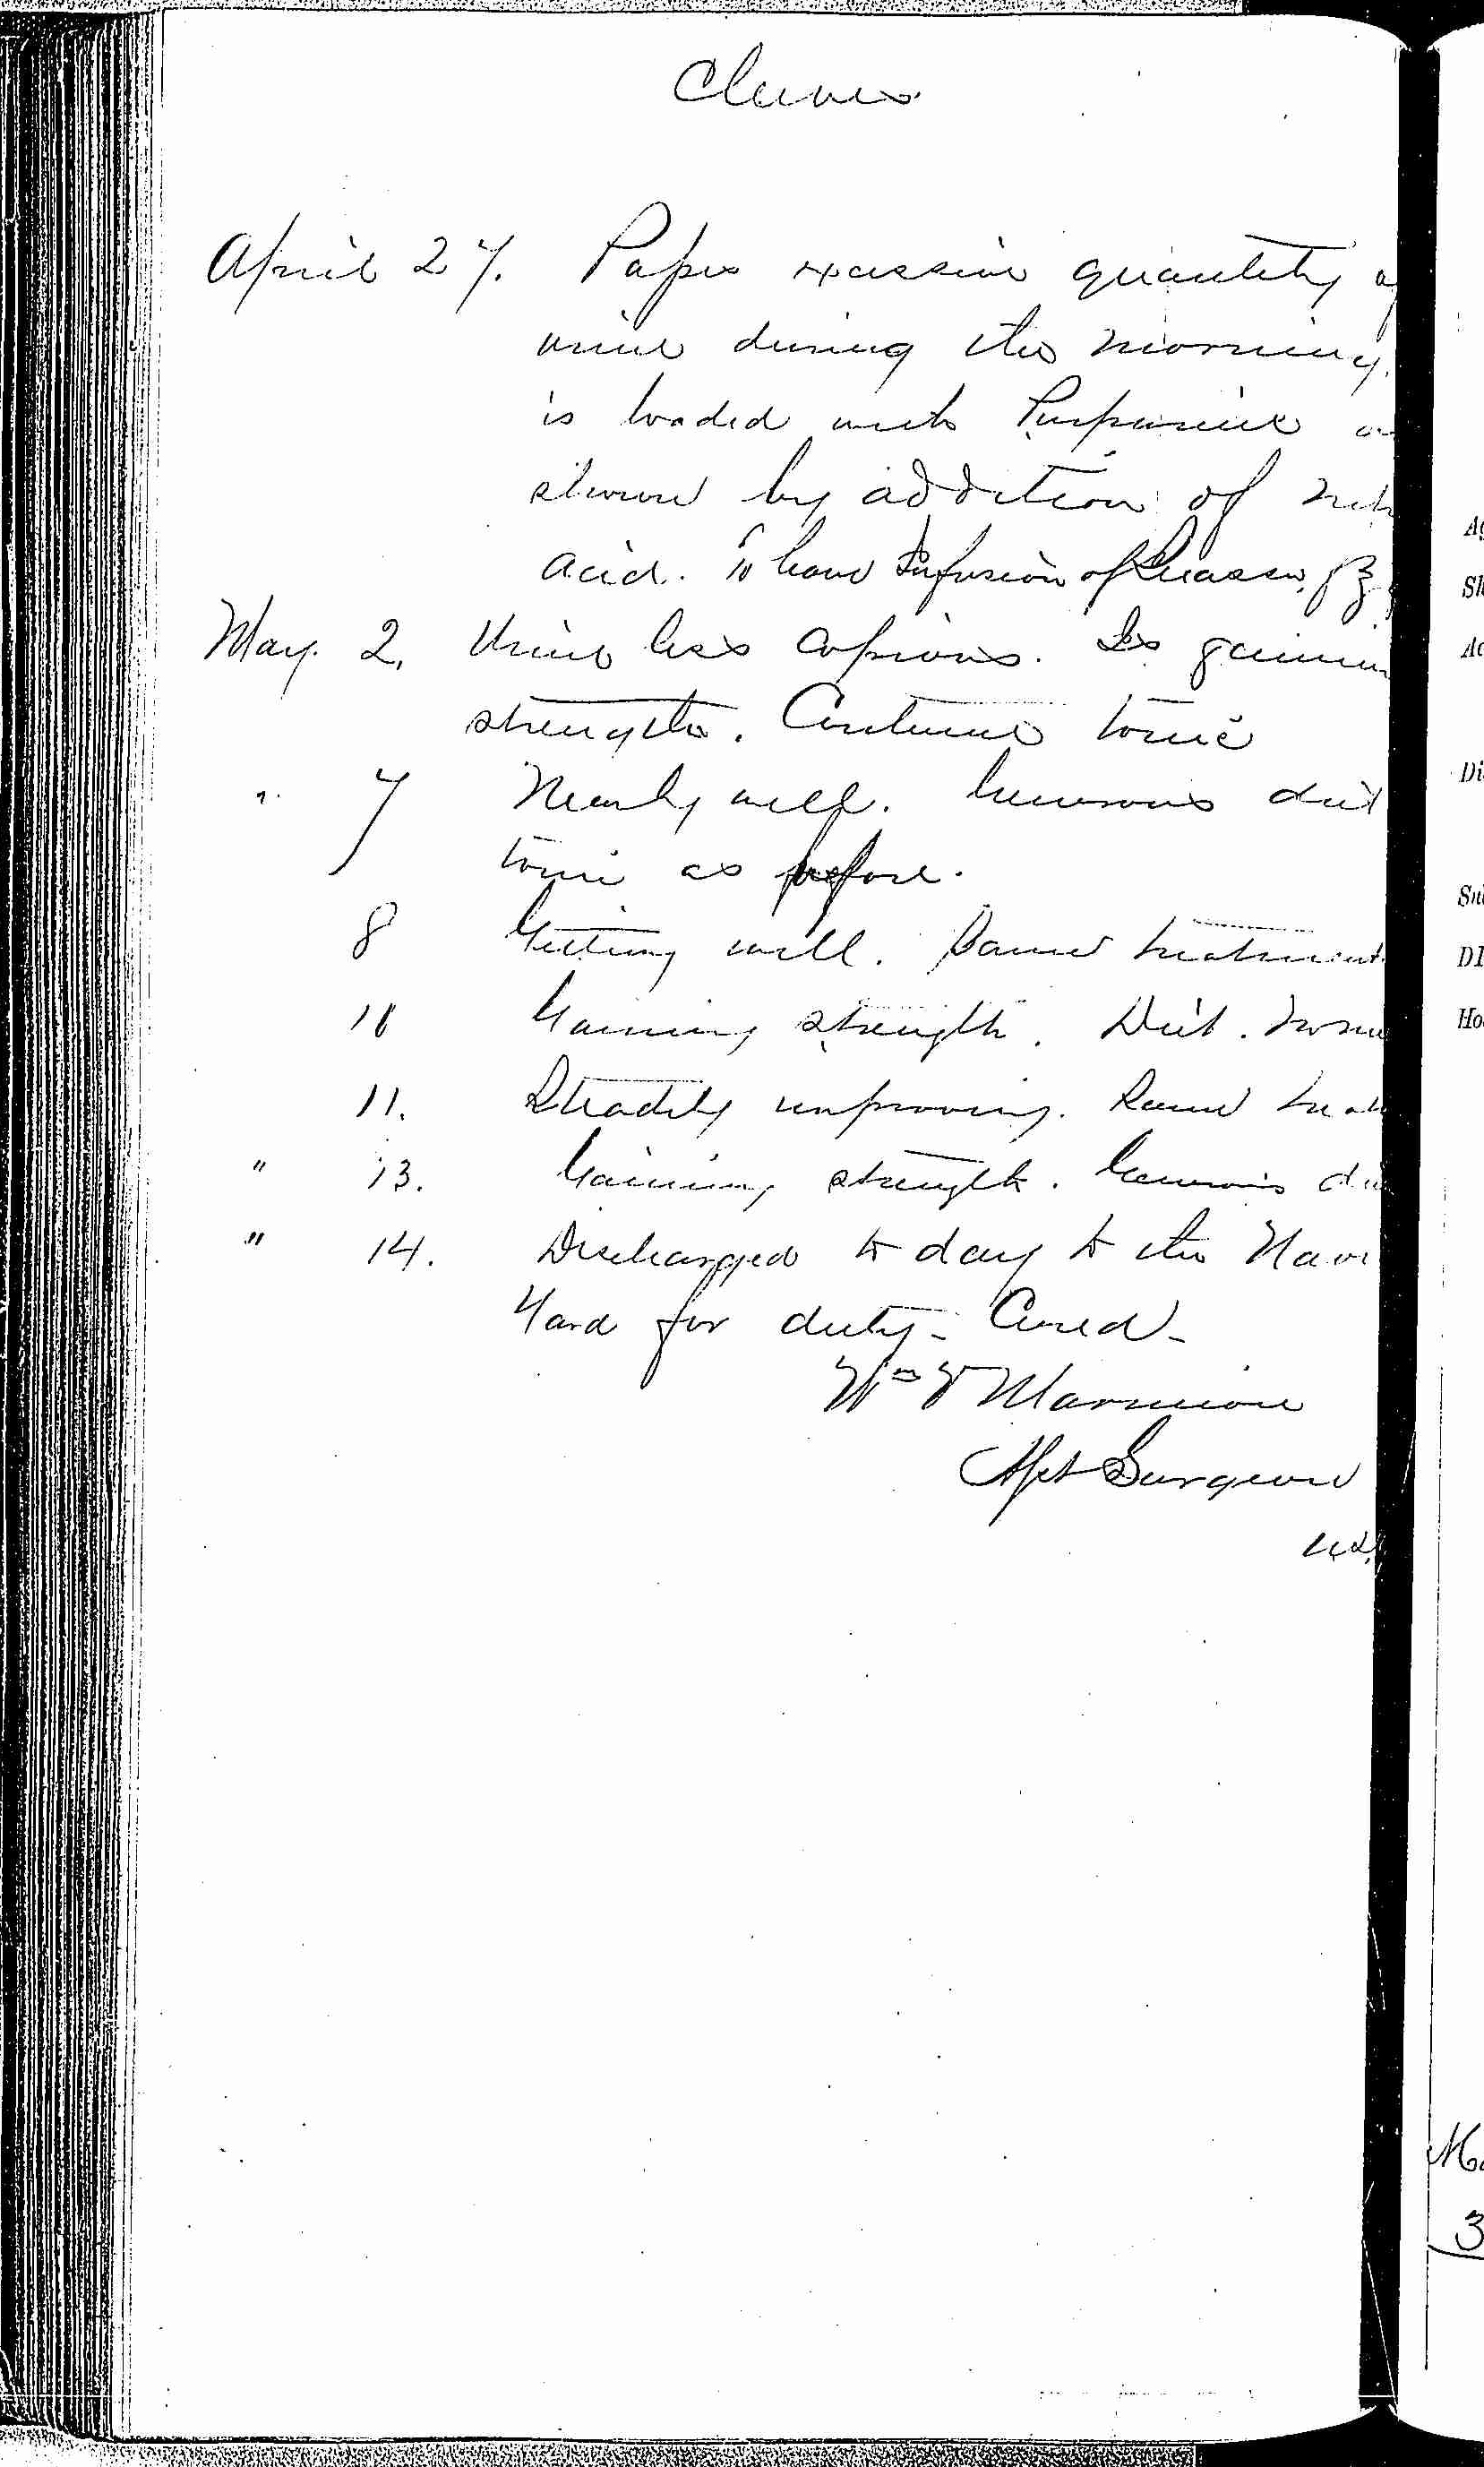 Entry for Arnold Cleeves (page 4 of 4) in the log Hospital Tickets and Case Papers - Naval Hospital - Washington, D.C. - 1868-69